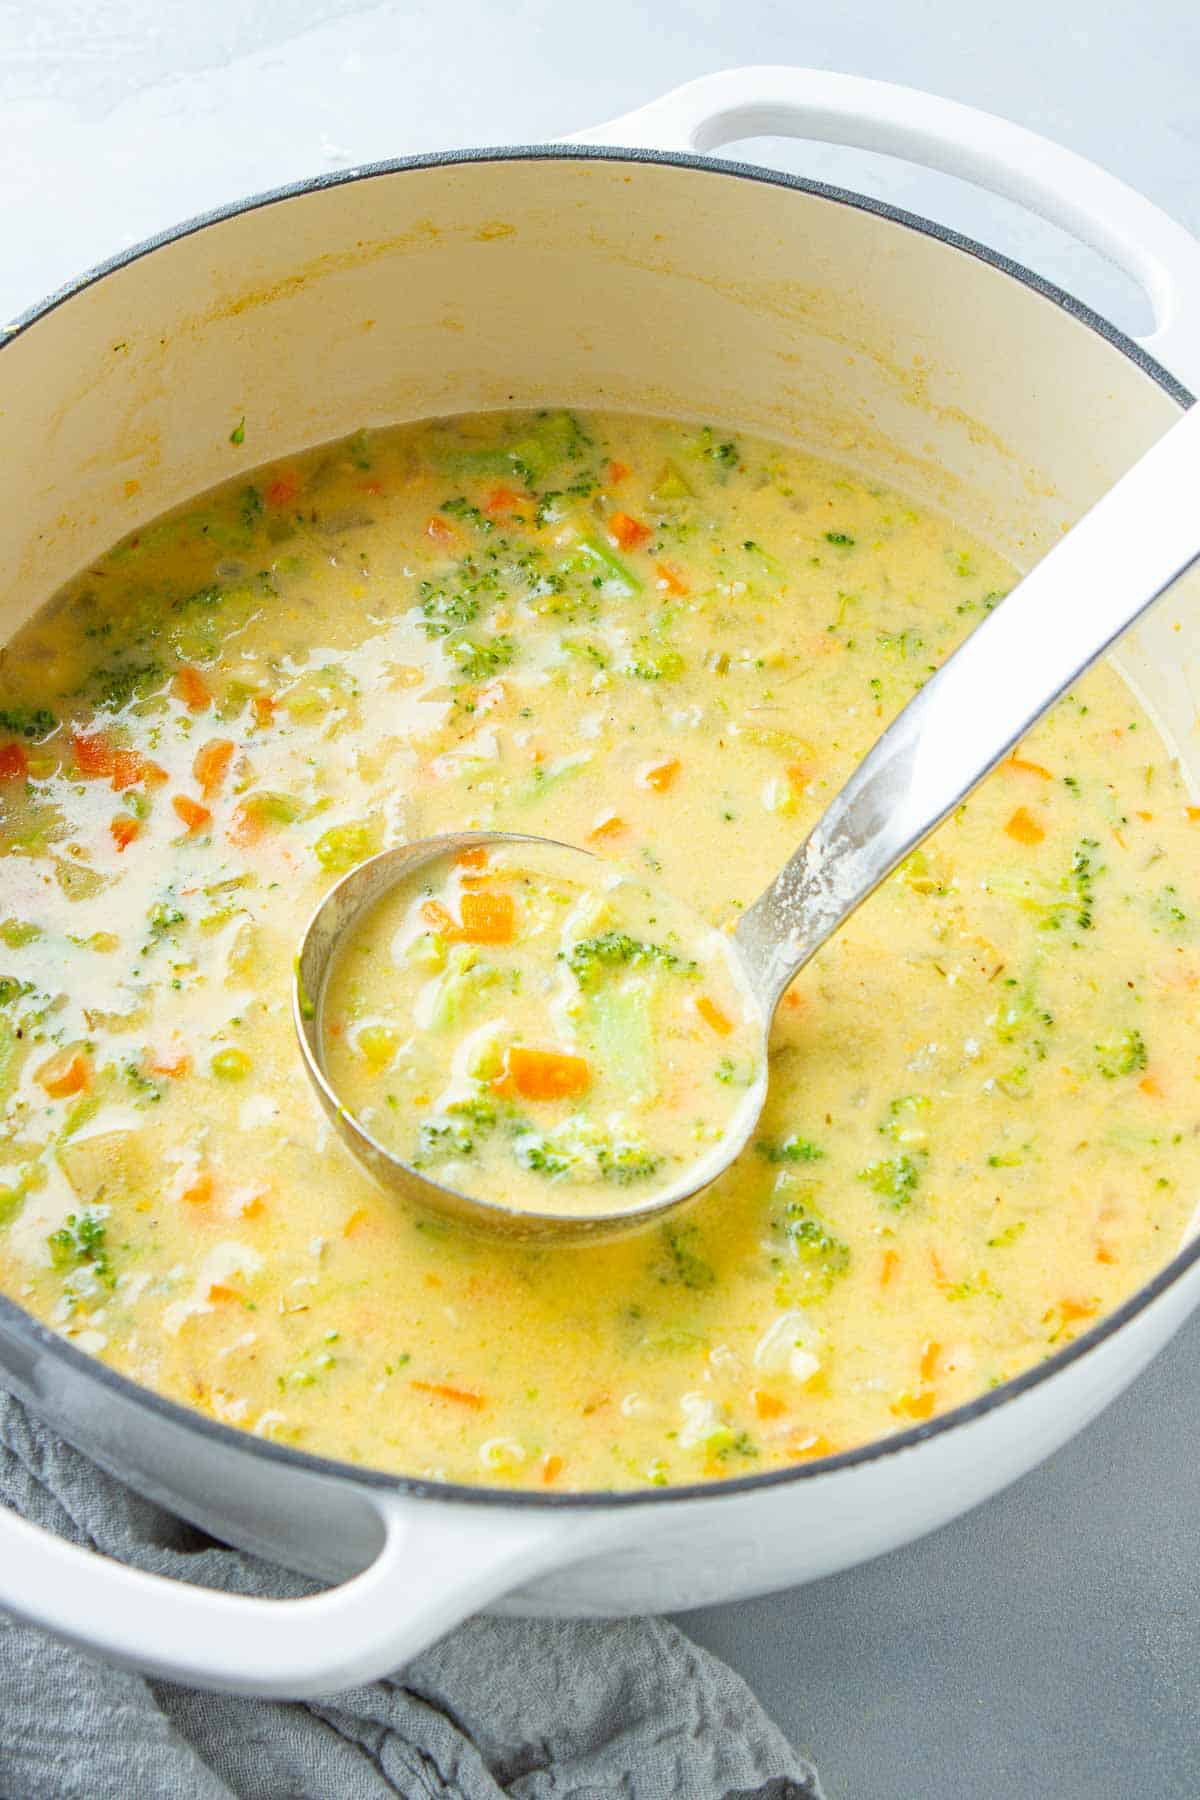 A large pot of creamy soup with broccoli and potato.